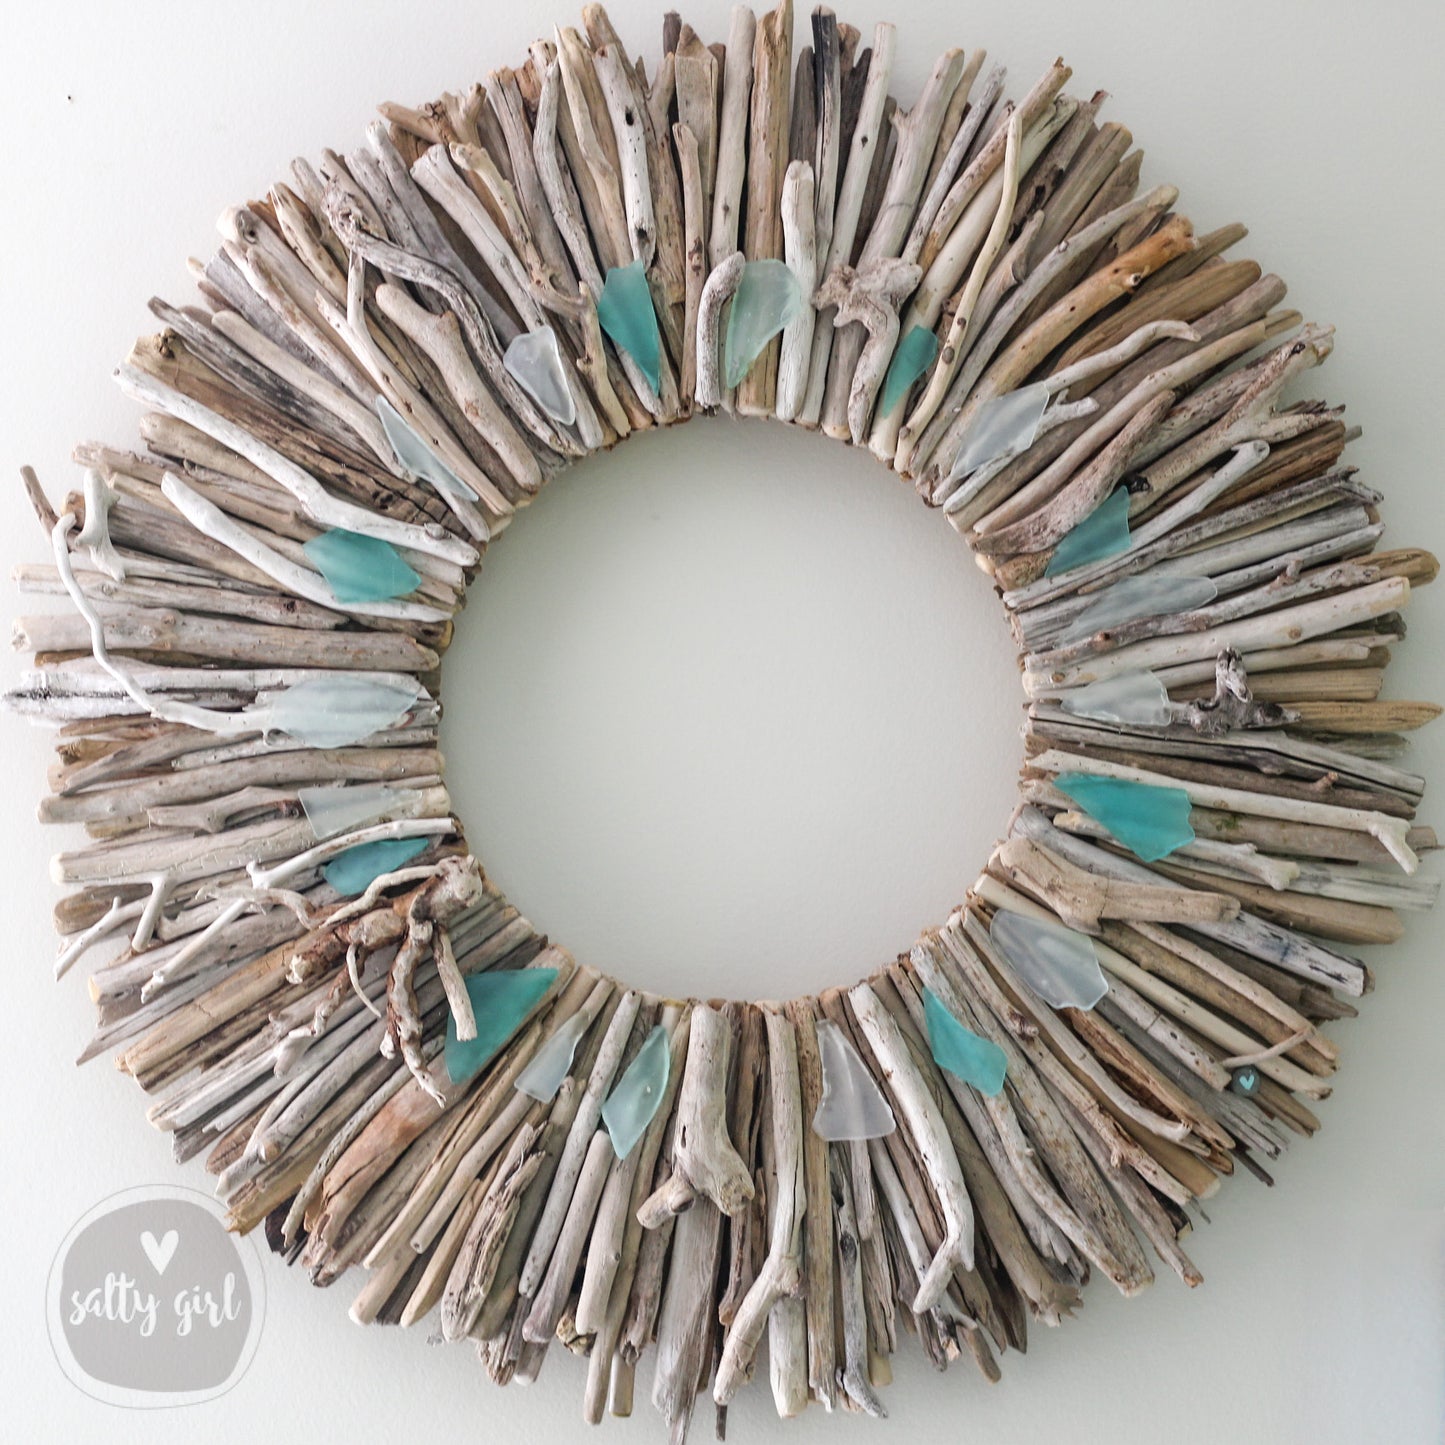 Driftwood Wreath with Shades of Aqua Sea Glass Accents - Sizes: 24" or 30"